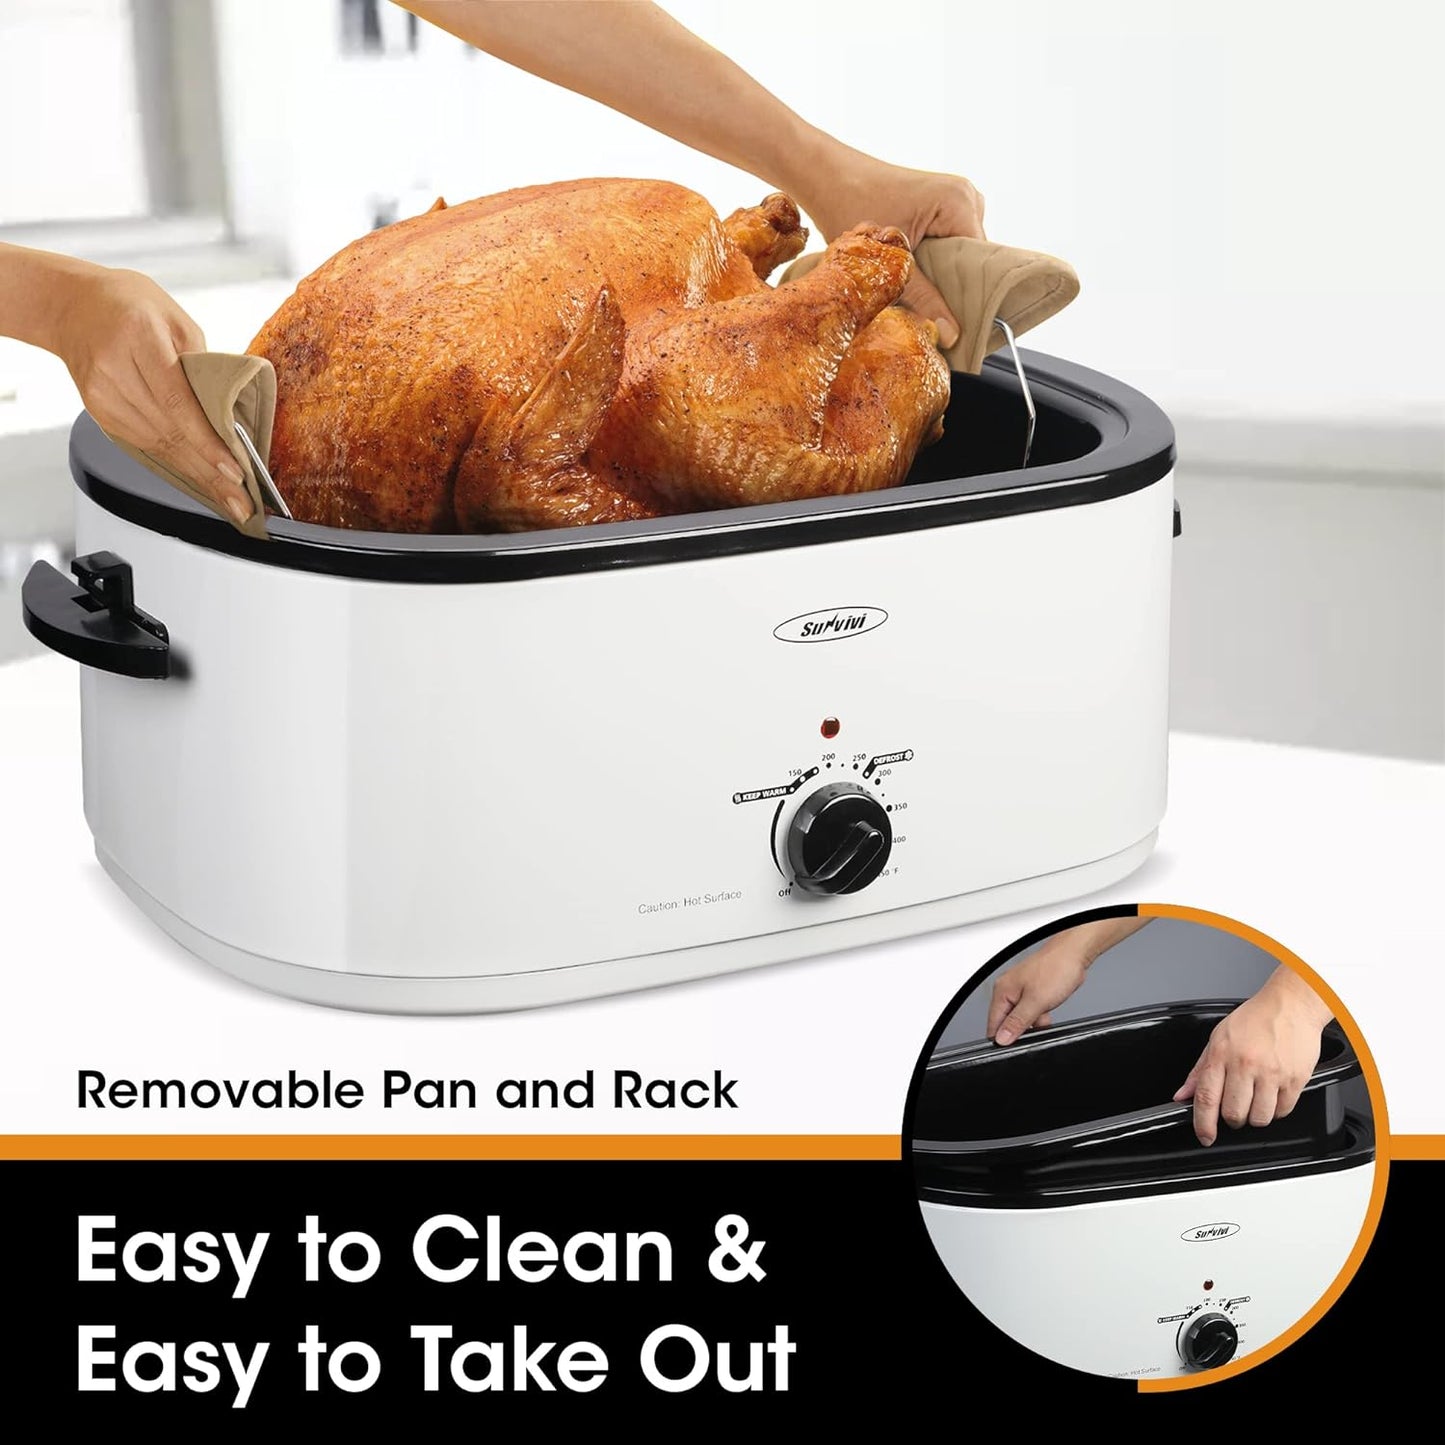 Roaster Oven, Electric Roaster Oven with Viewing Lid, Sunvivi Turkey Roaster with Unique Defrost/Warm Function, Large Roaster with with Removable Pan & Rack, Stainless Steel, White